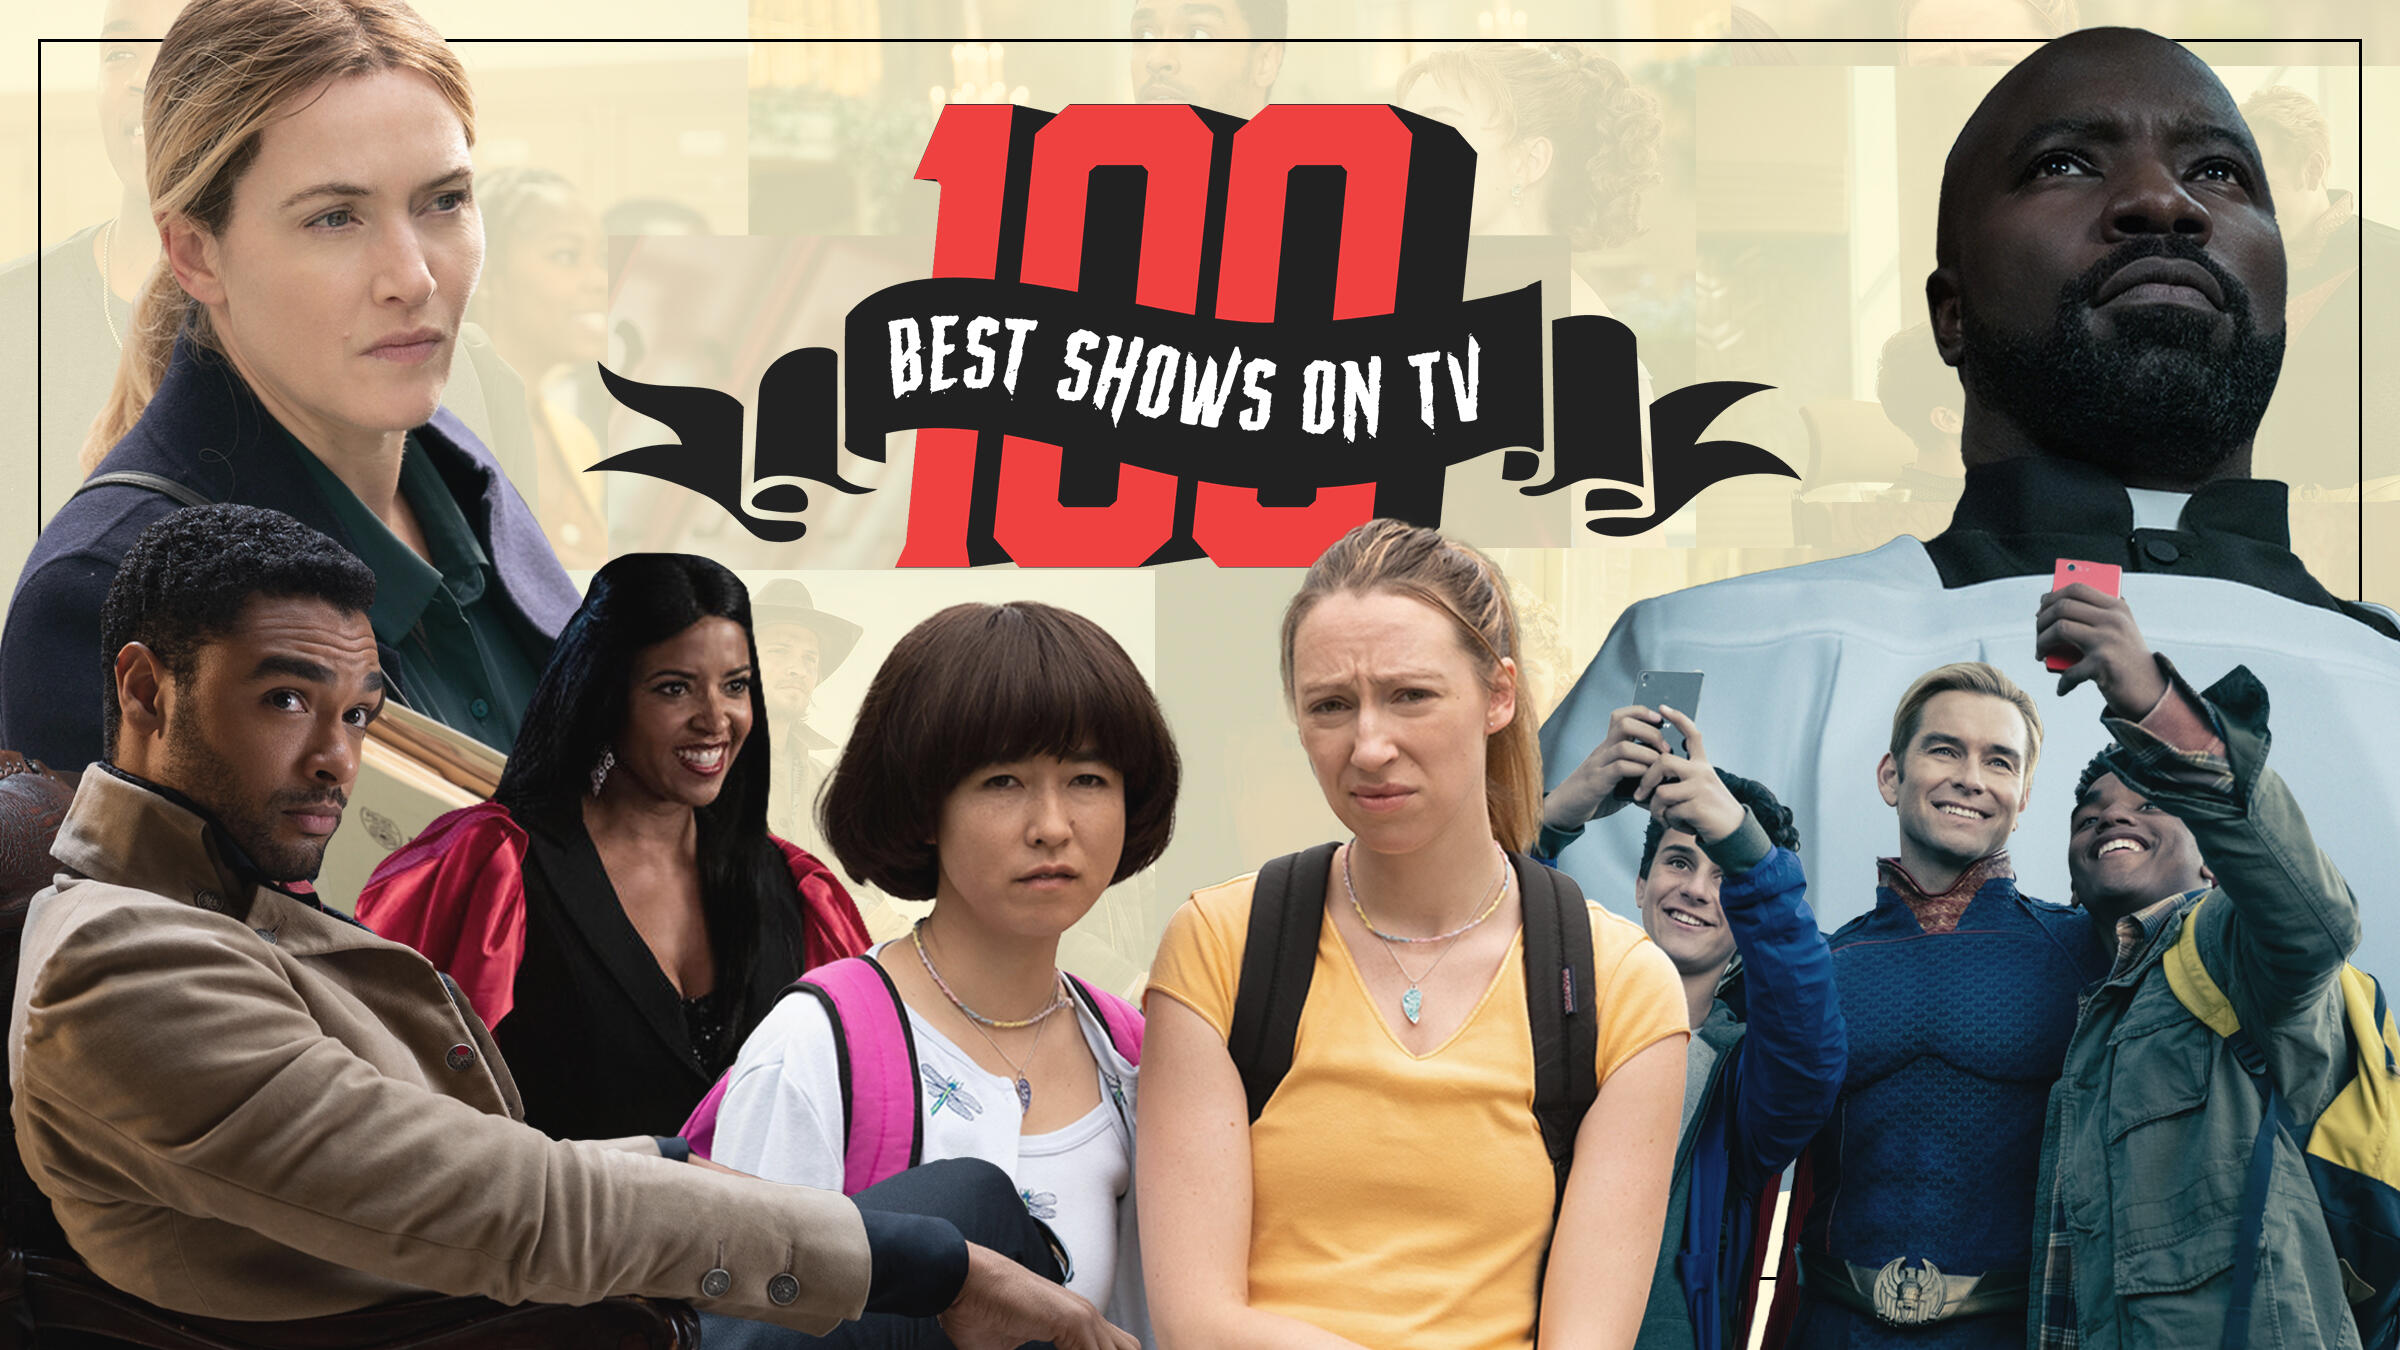 TV Guide Ranks the 100 Best Shows on TV